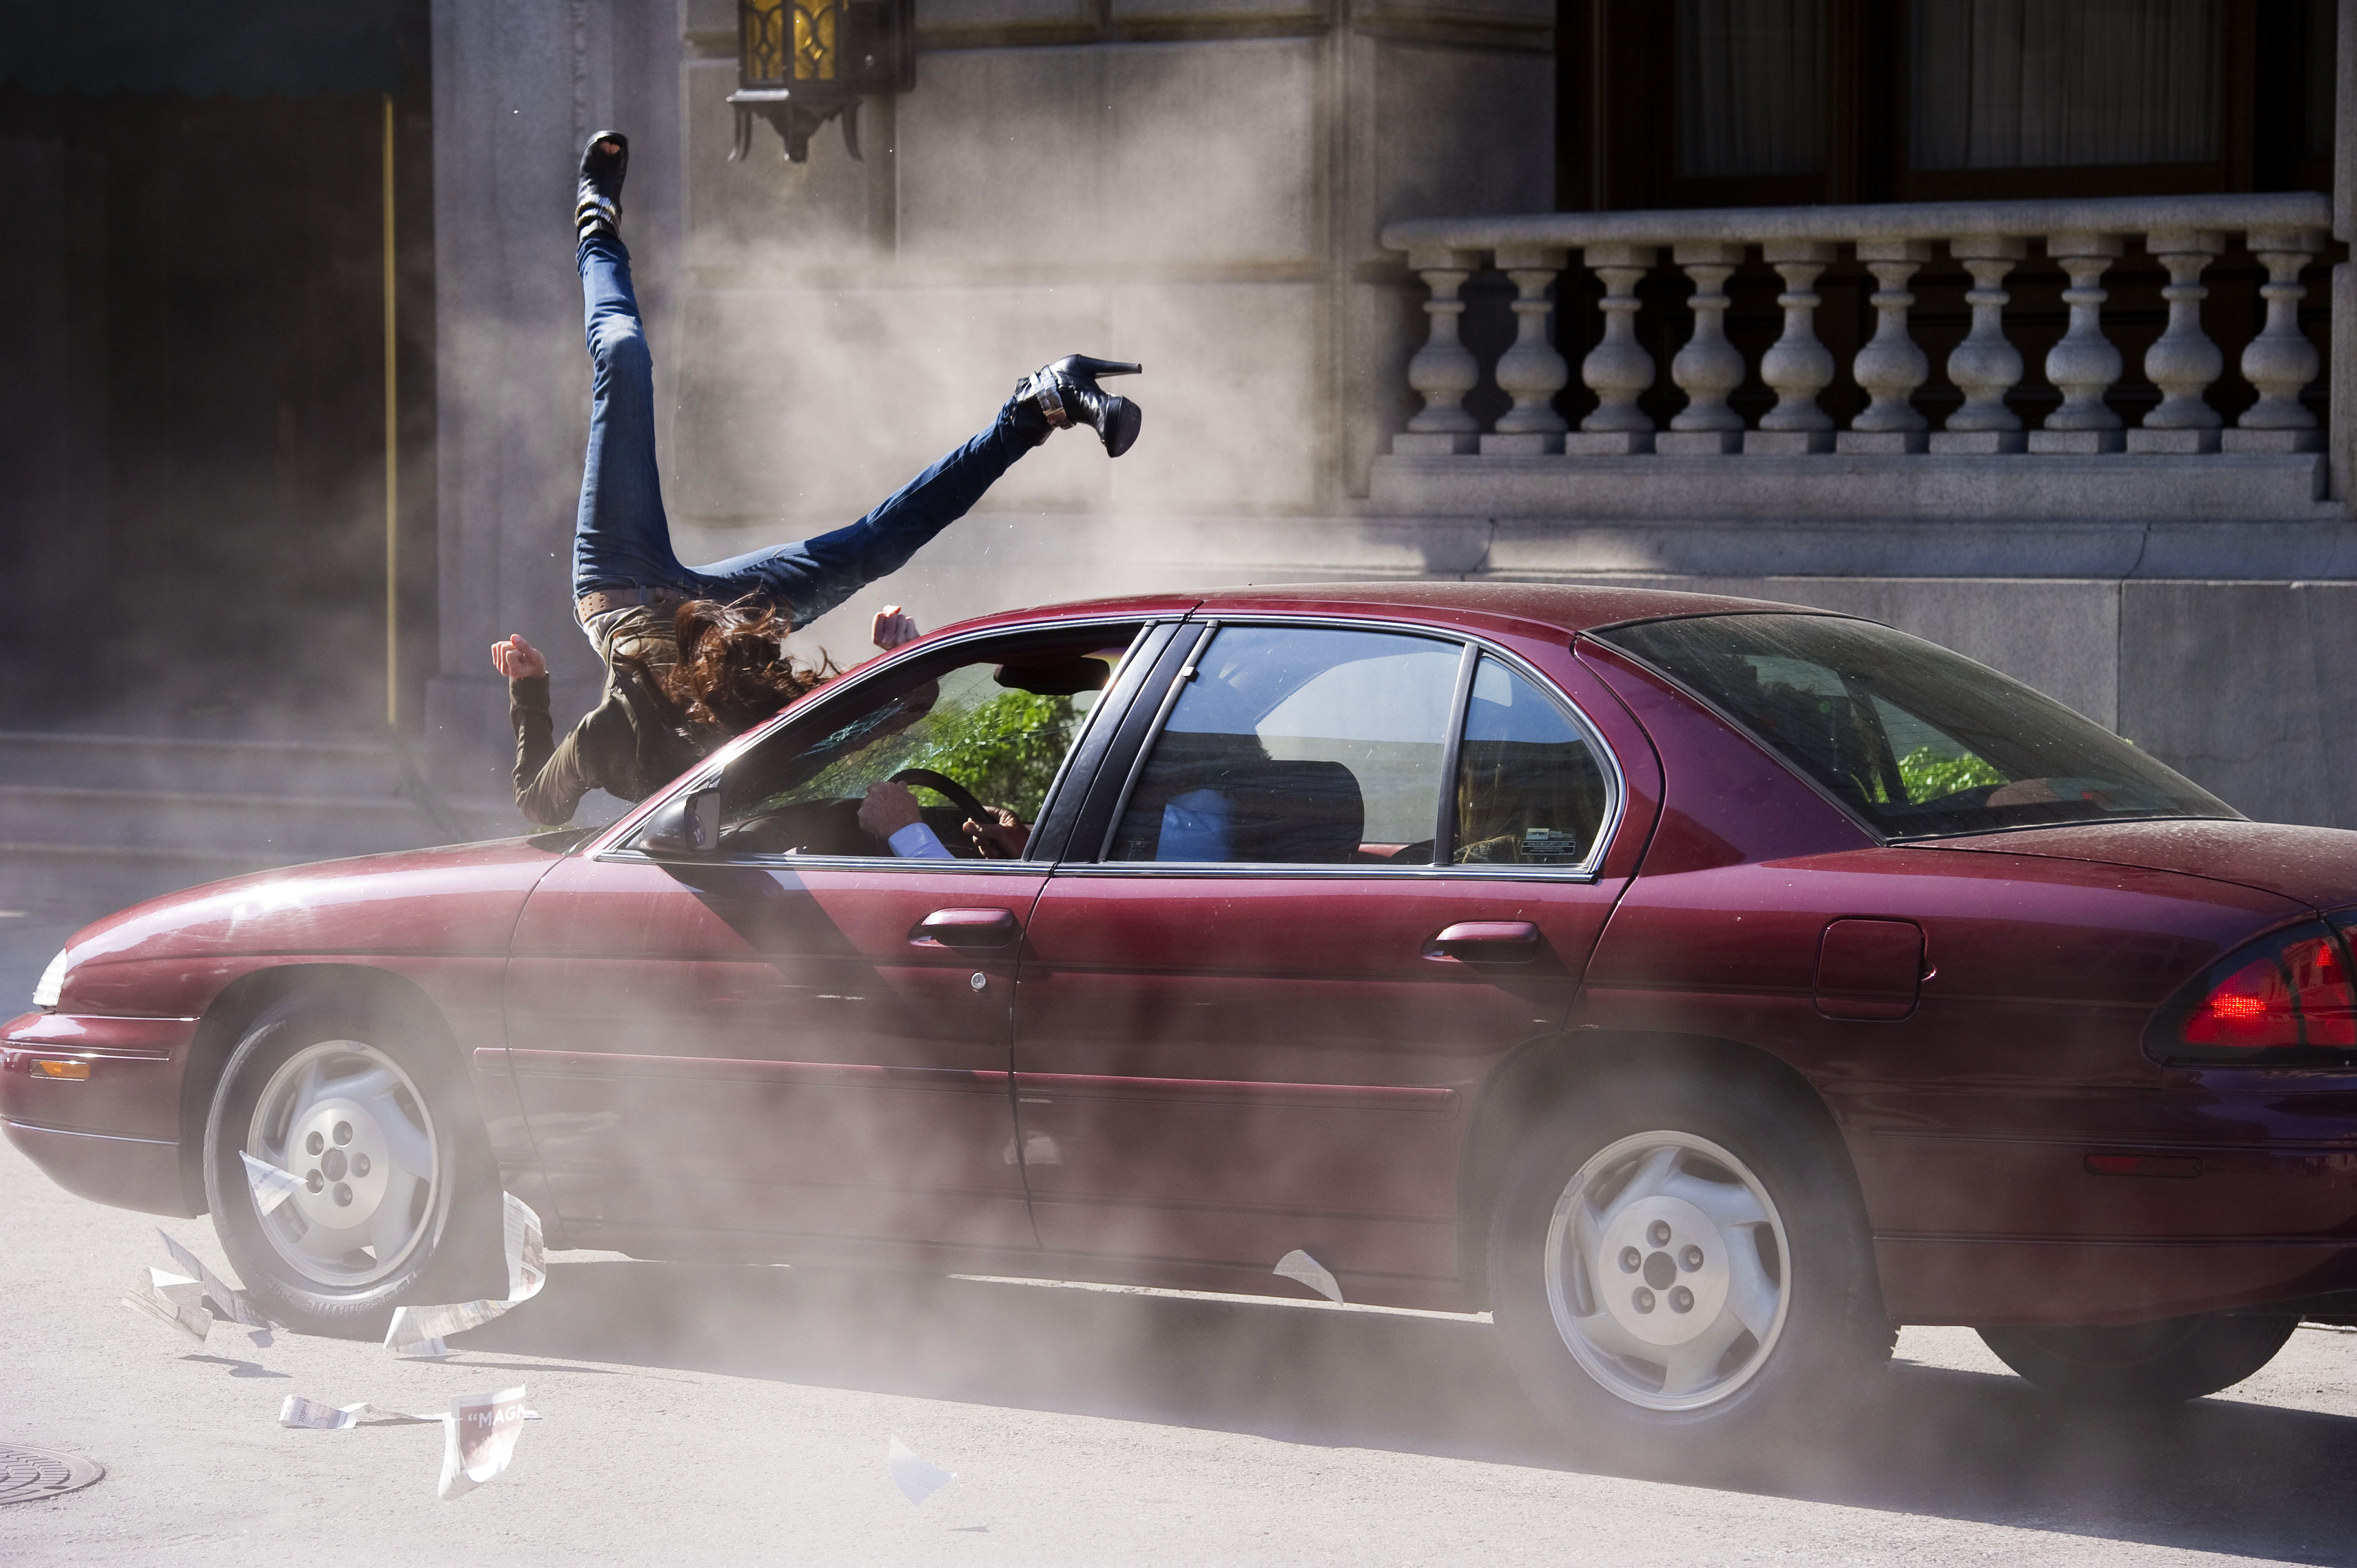 Stuntwoman Tammie Baird taking a car hit for actress Shannon Elizabeth on Chris Brown's 